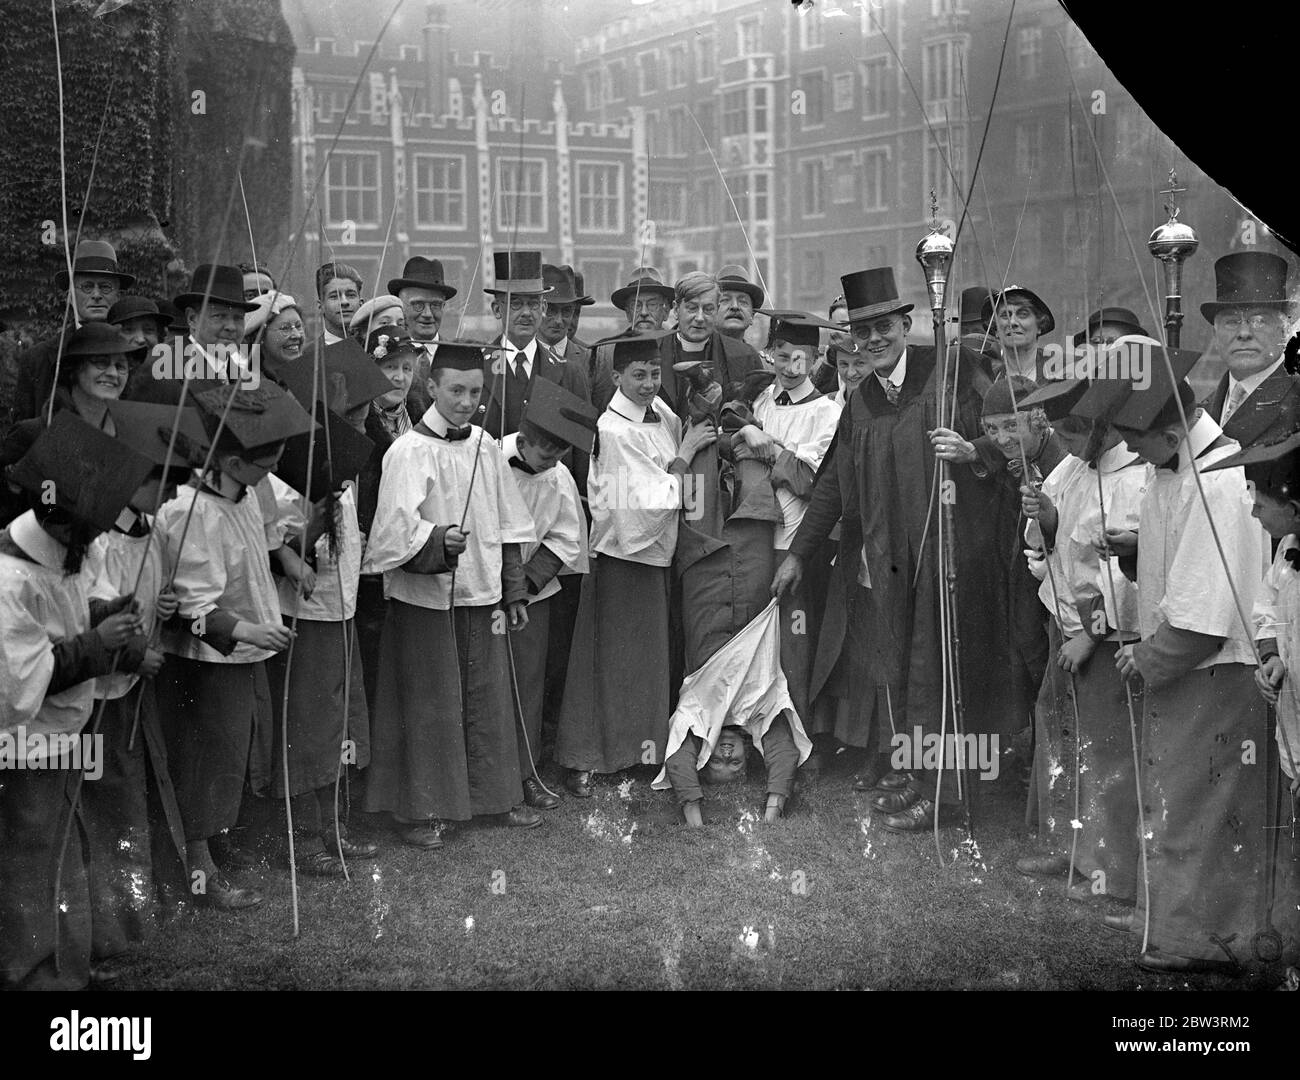 Choirboy Saw It Upside Down ! The rogation - tide ceremony of Beating the Bounds of St . Clement Dane ' s Church , Strand was carried out on Ascension Dey ( today ) . Photo shows : Inverting a choirboy during the ceremony . 21 May 1936 Stock Photo